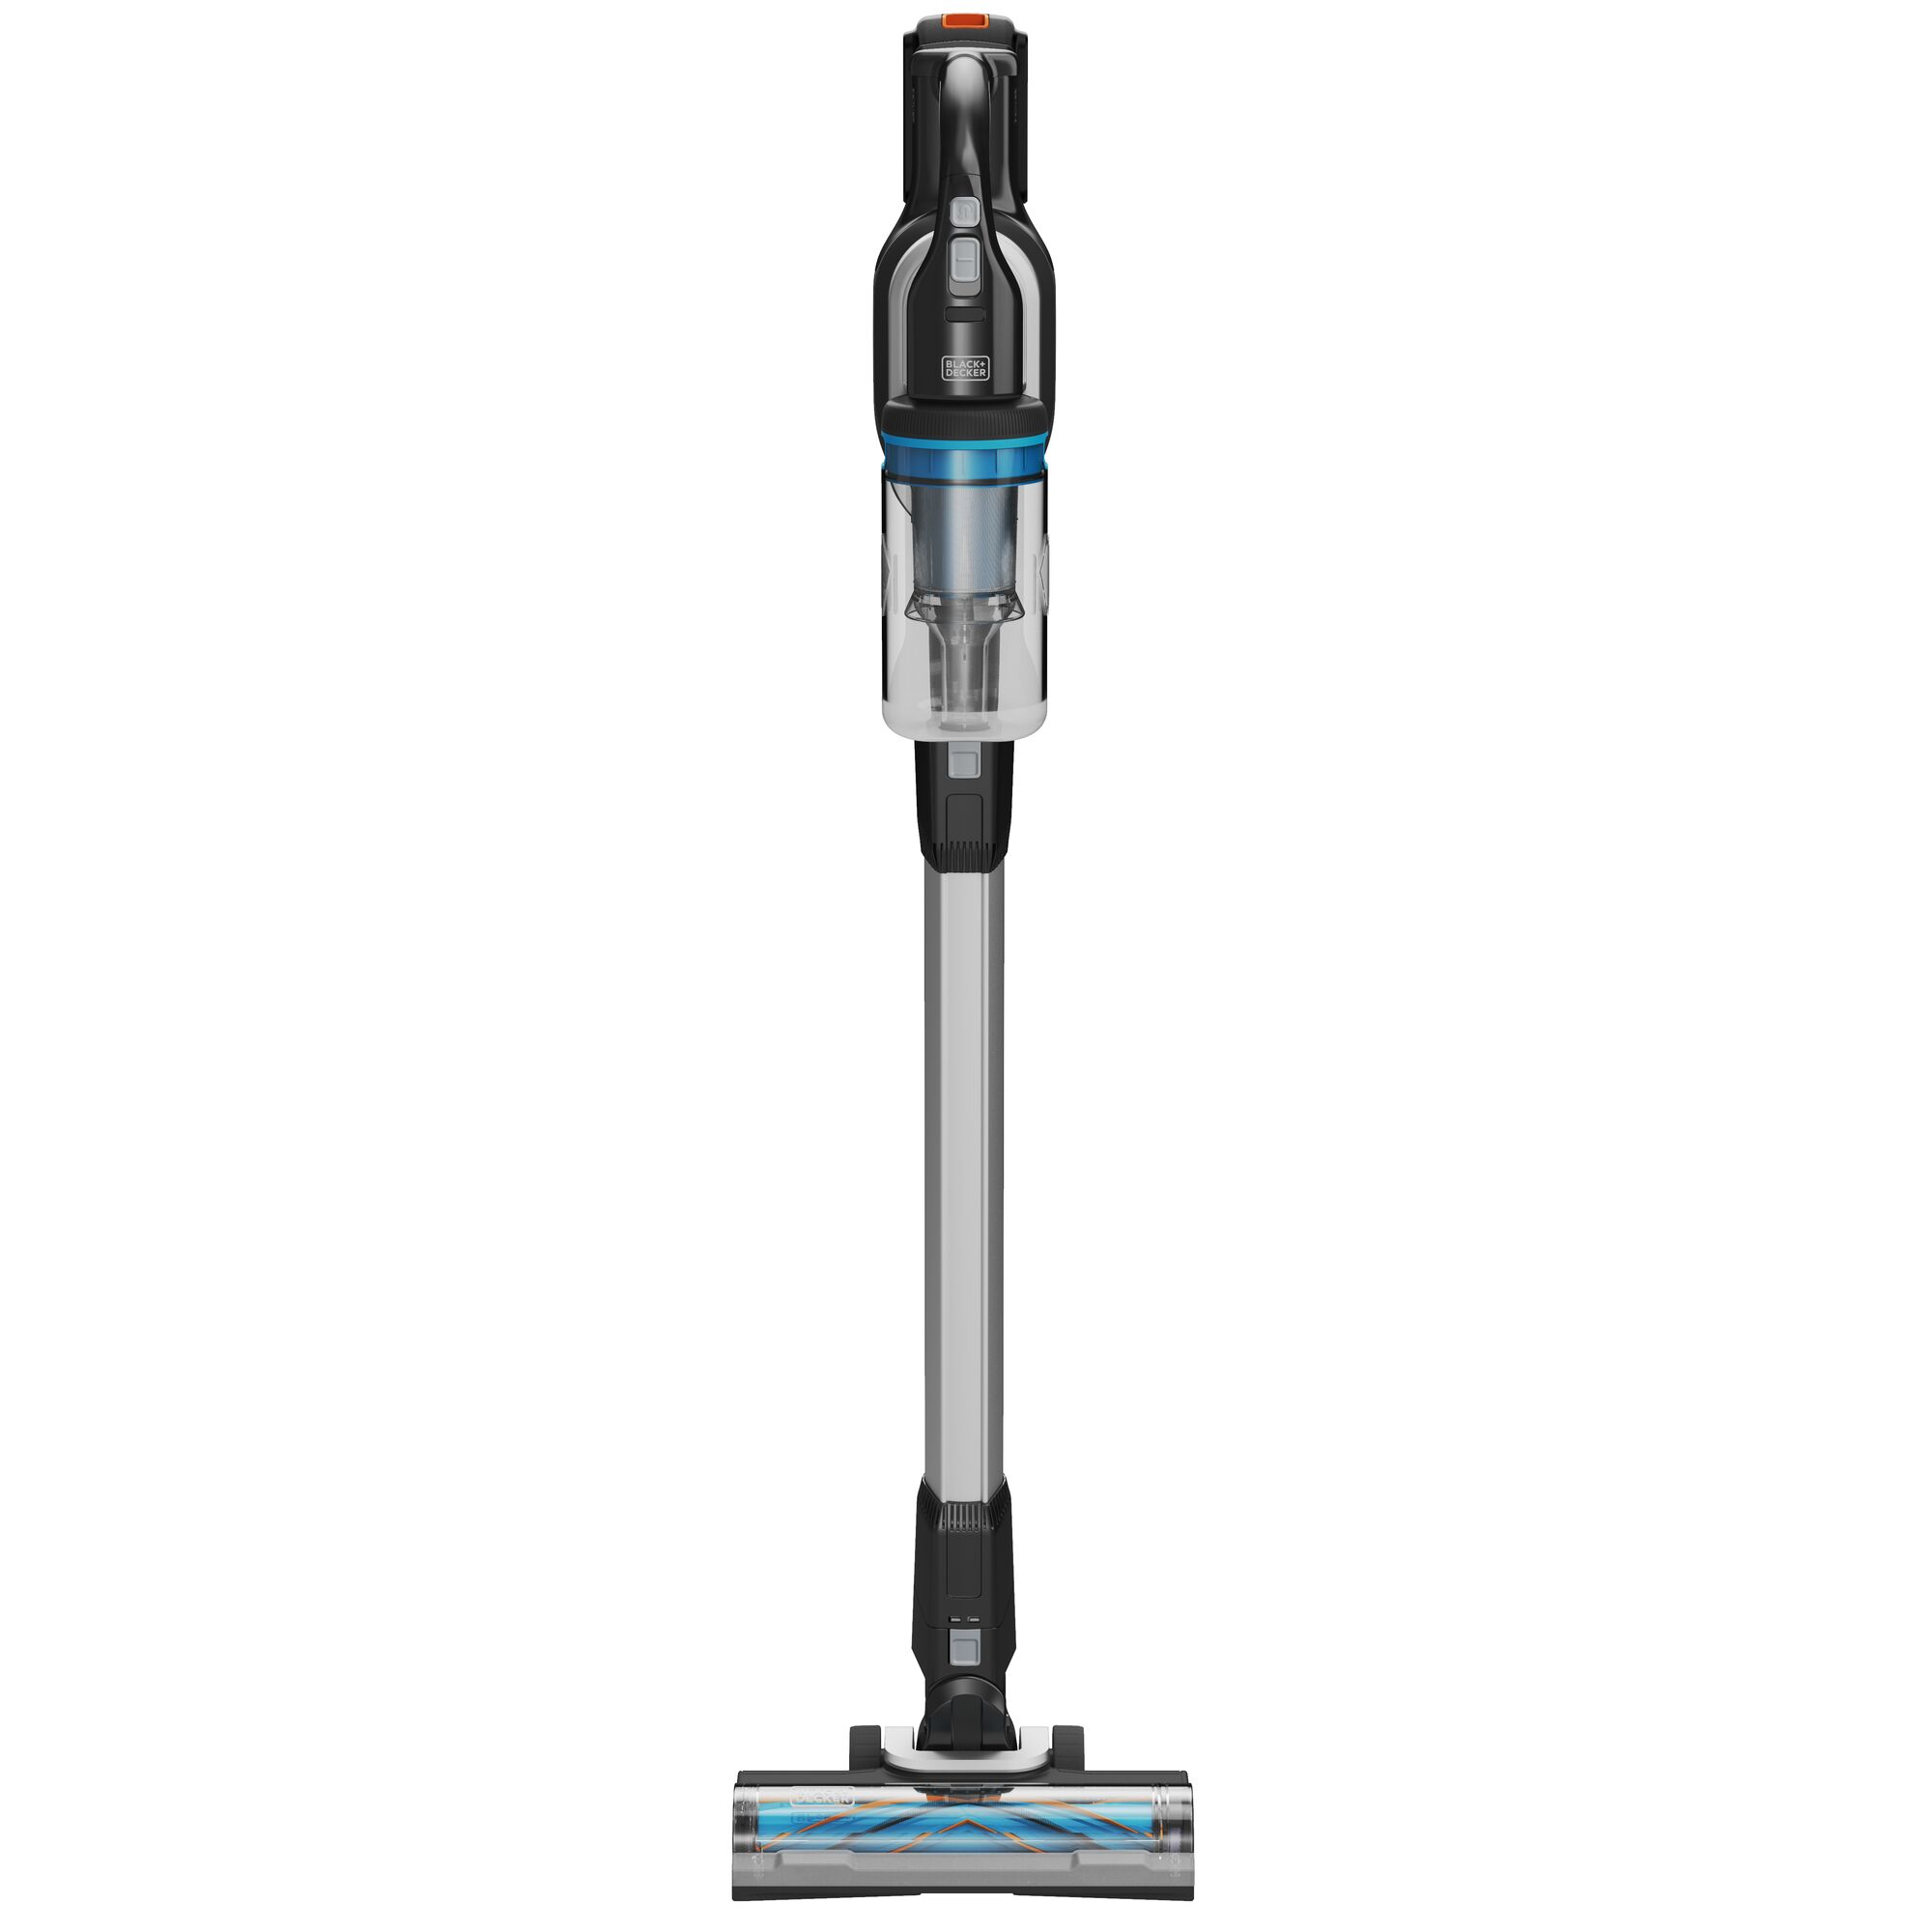 Front view of the BLACK+DECKER POWERSERIES Extreme MAX Cordless Stick Vac with LED head lights on